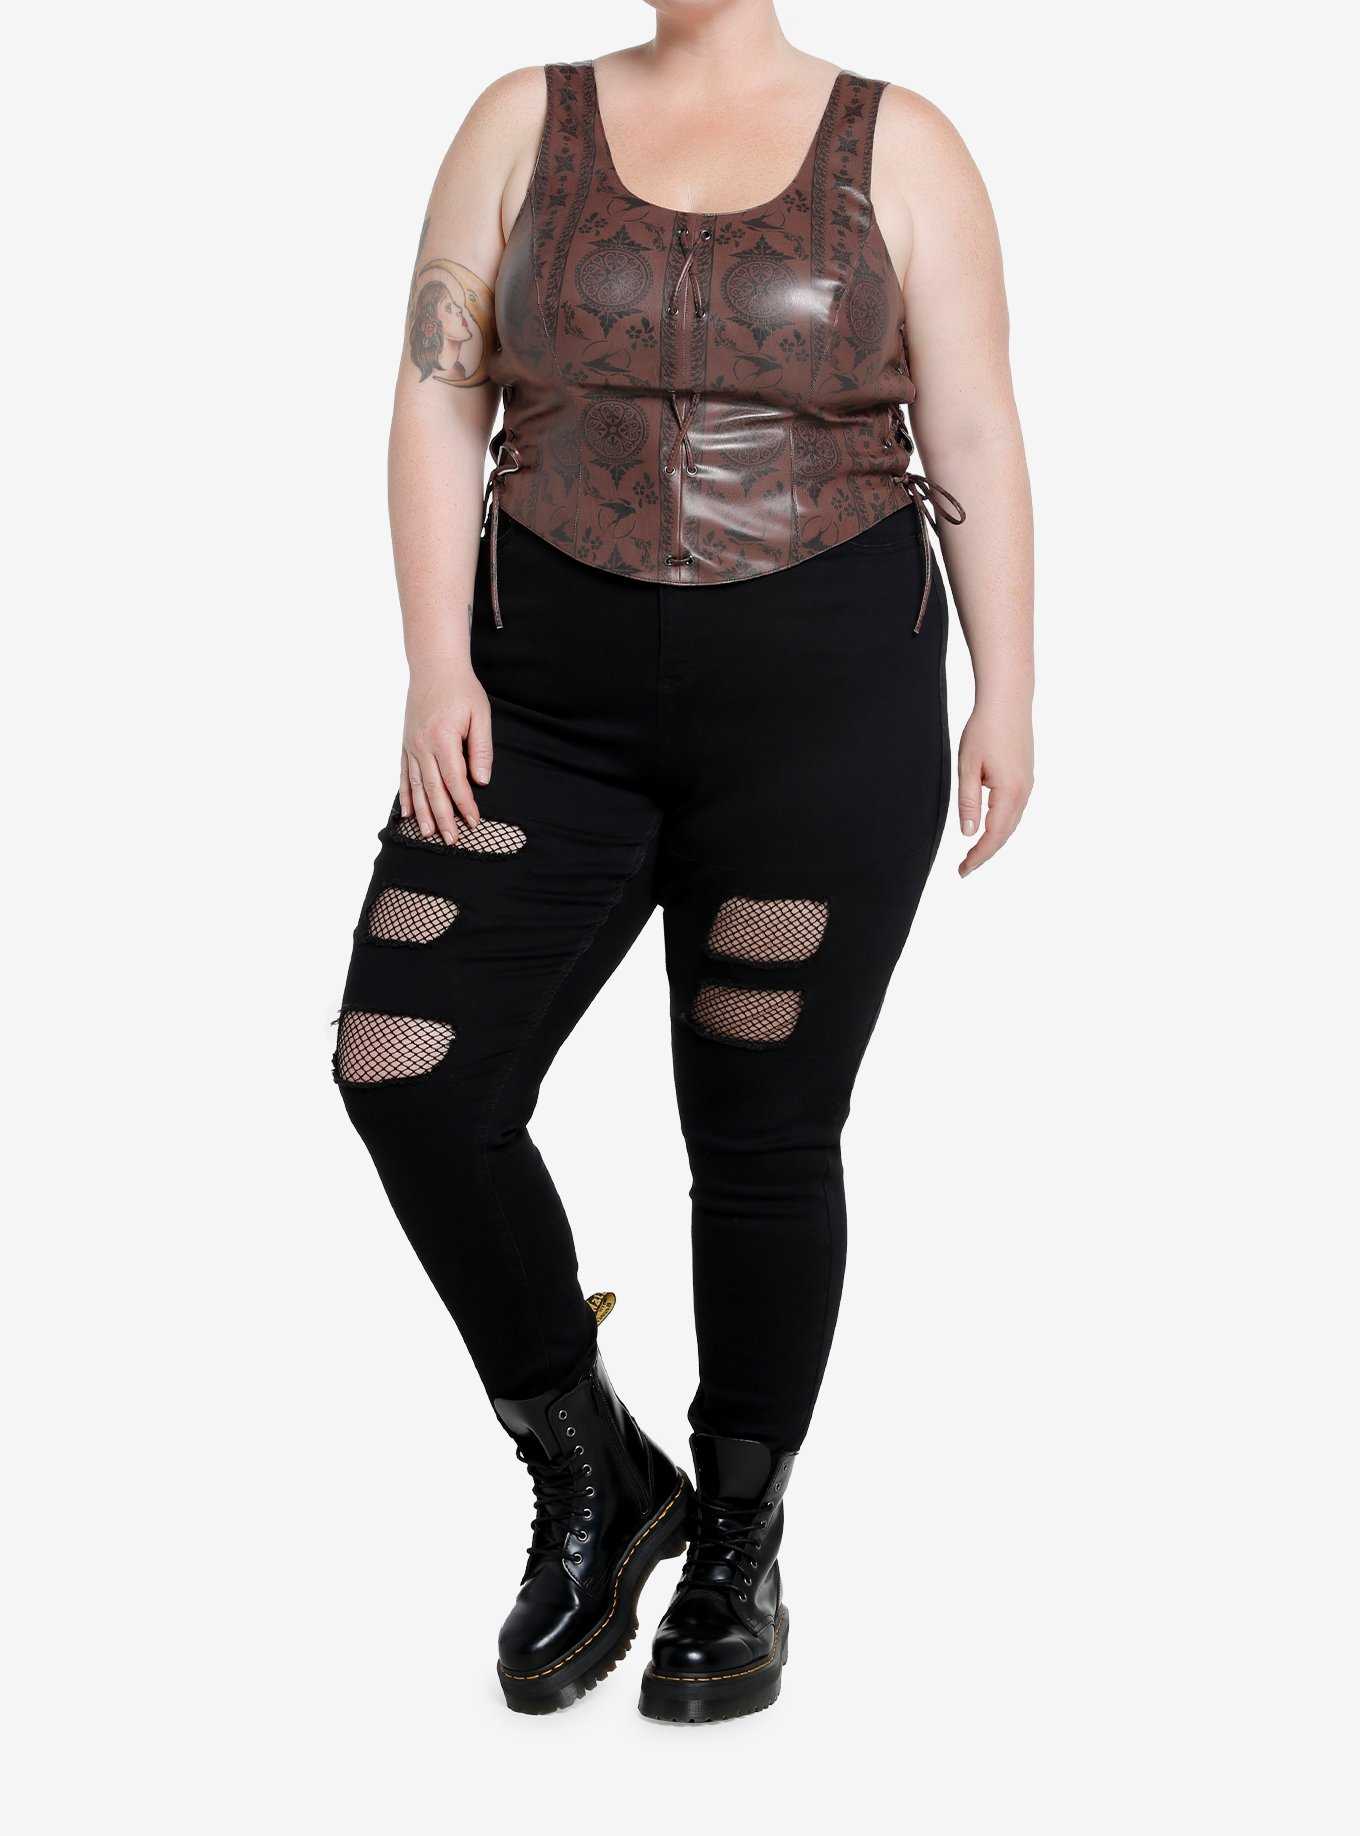 The Witcher Ciri Icons Lace-Up Girls Bustier Plus Size, , hi-res